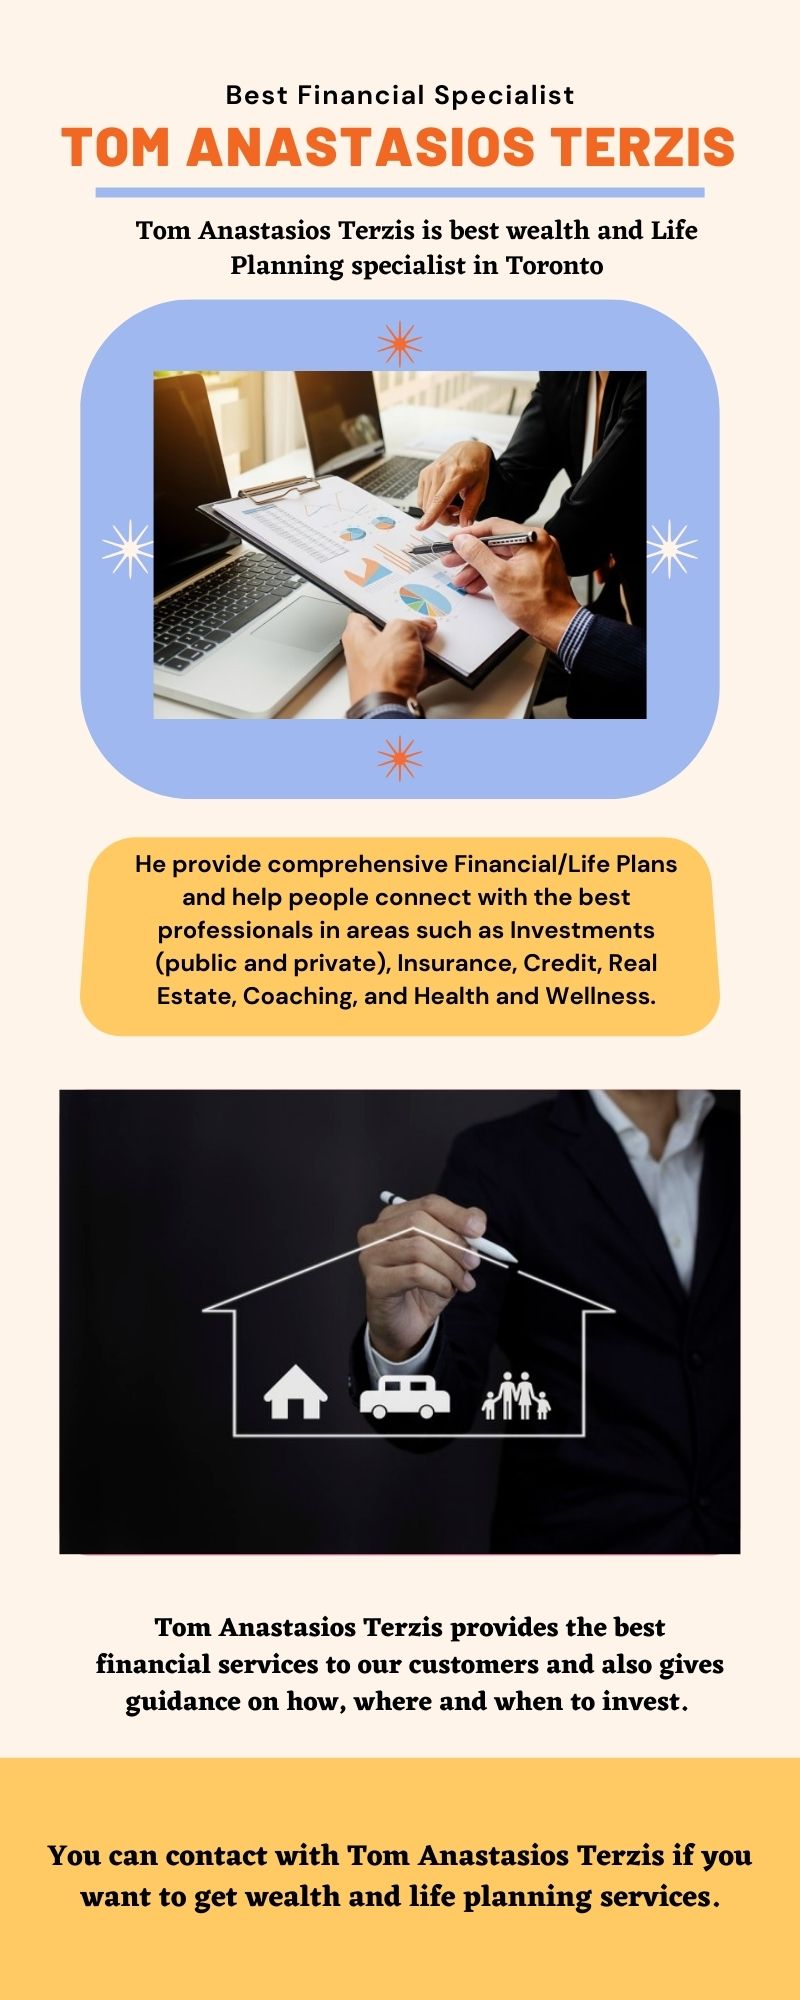 Get Wealth and Life Planning Services from Tom Anastasios Terzis